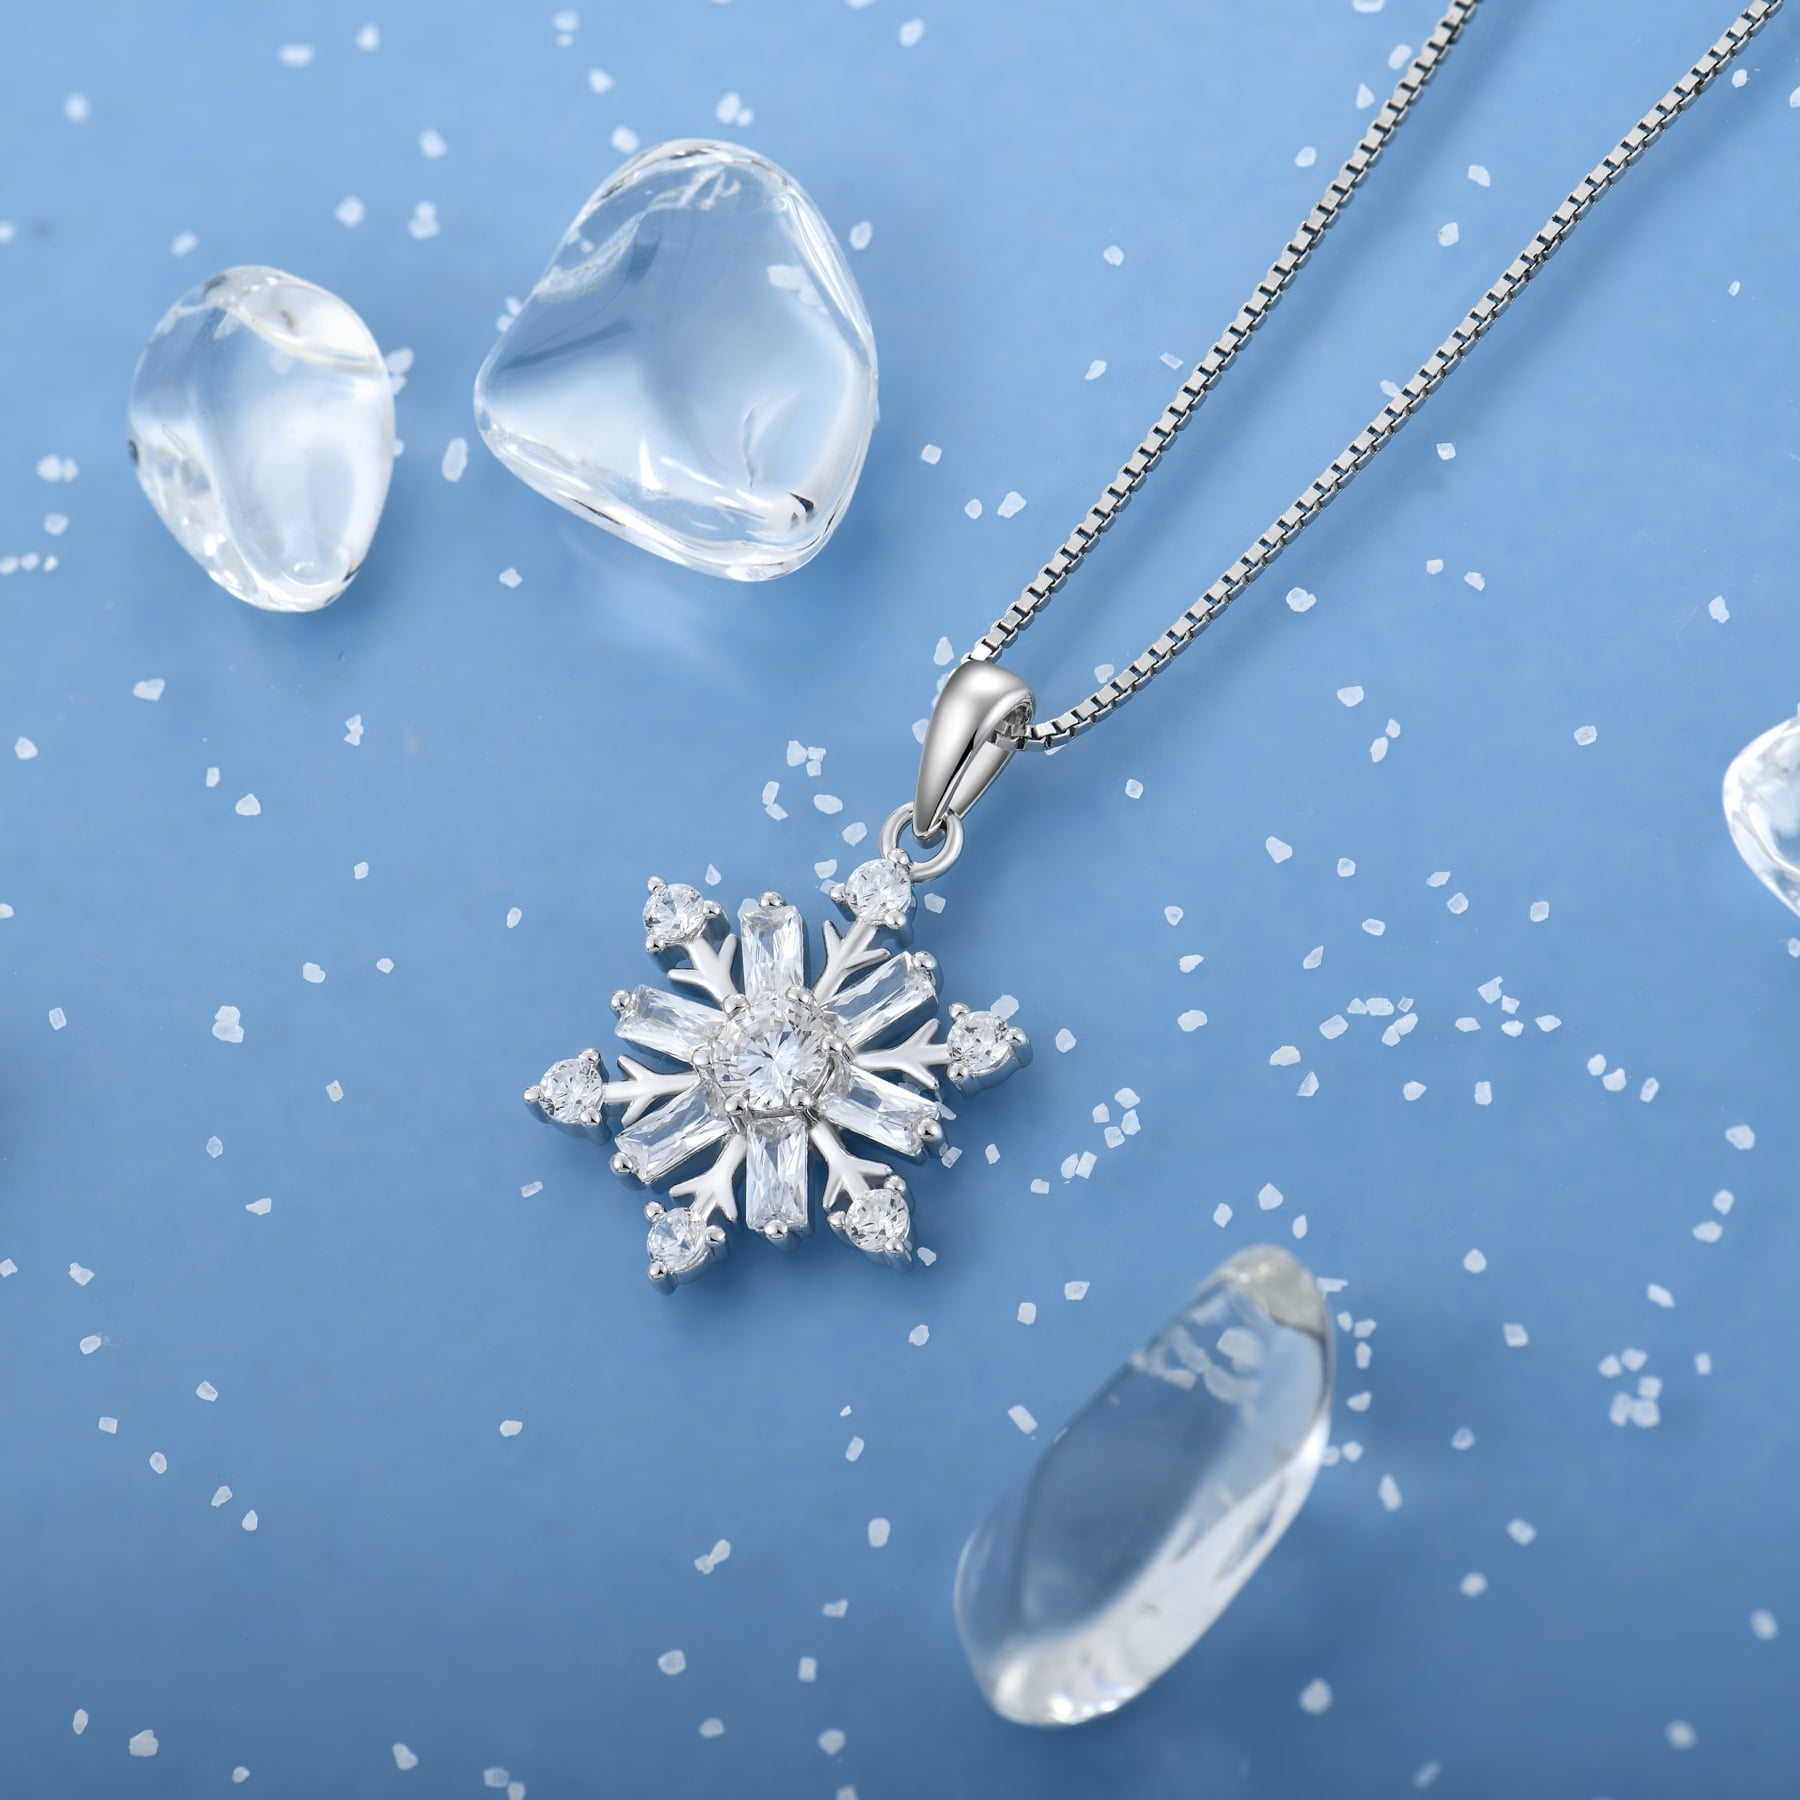 Silver Snowflake Necklace for Women, Snowflake Jewelry Gift for Her - Etsy  | Winter jewelry trends, Snowflake jewelry, Simple bridal necklace